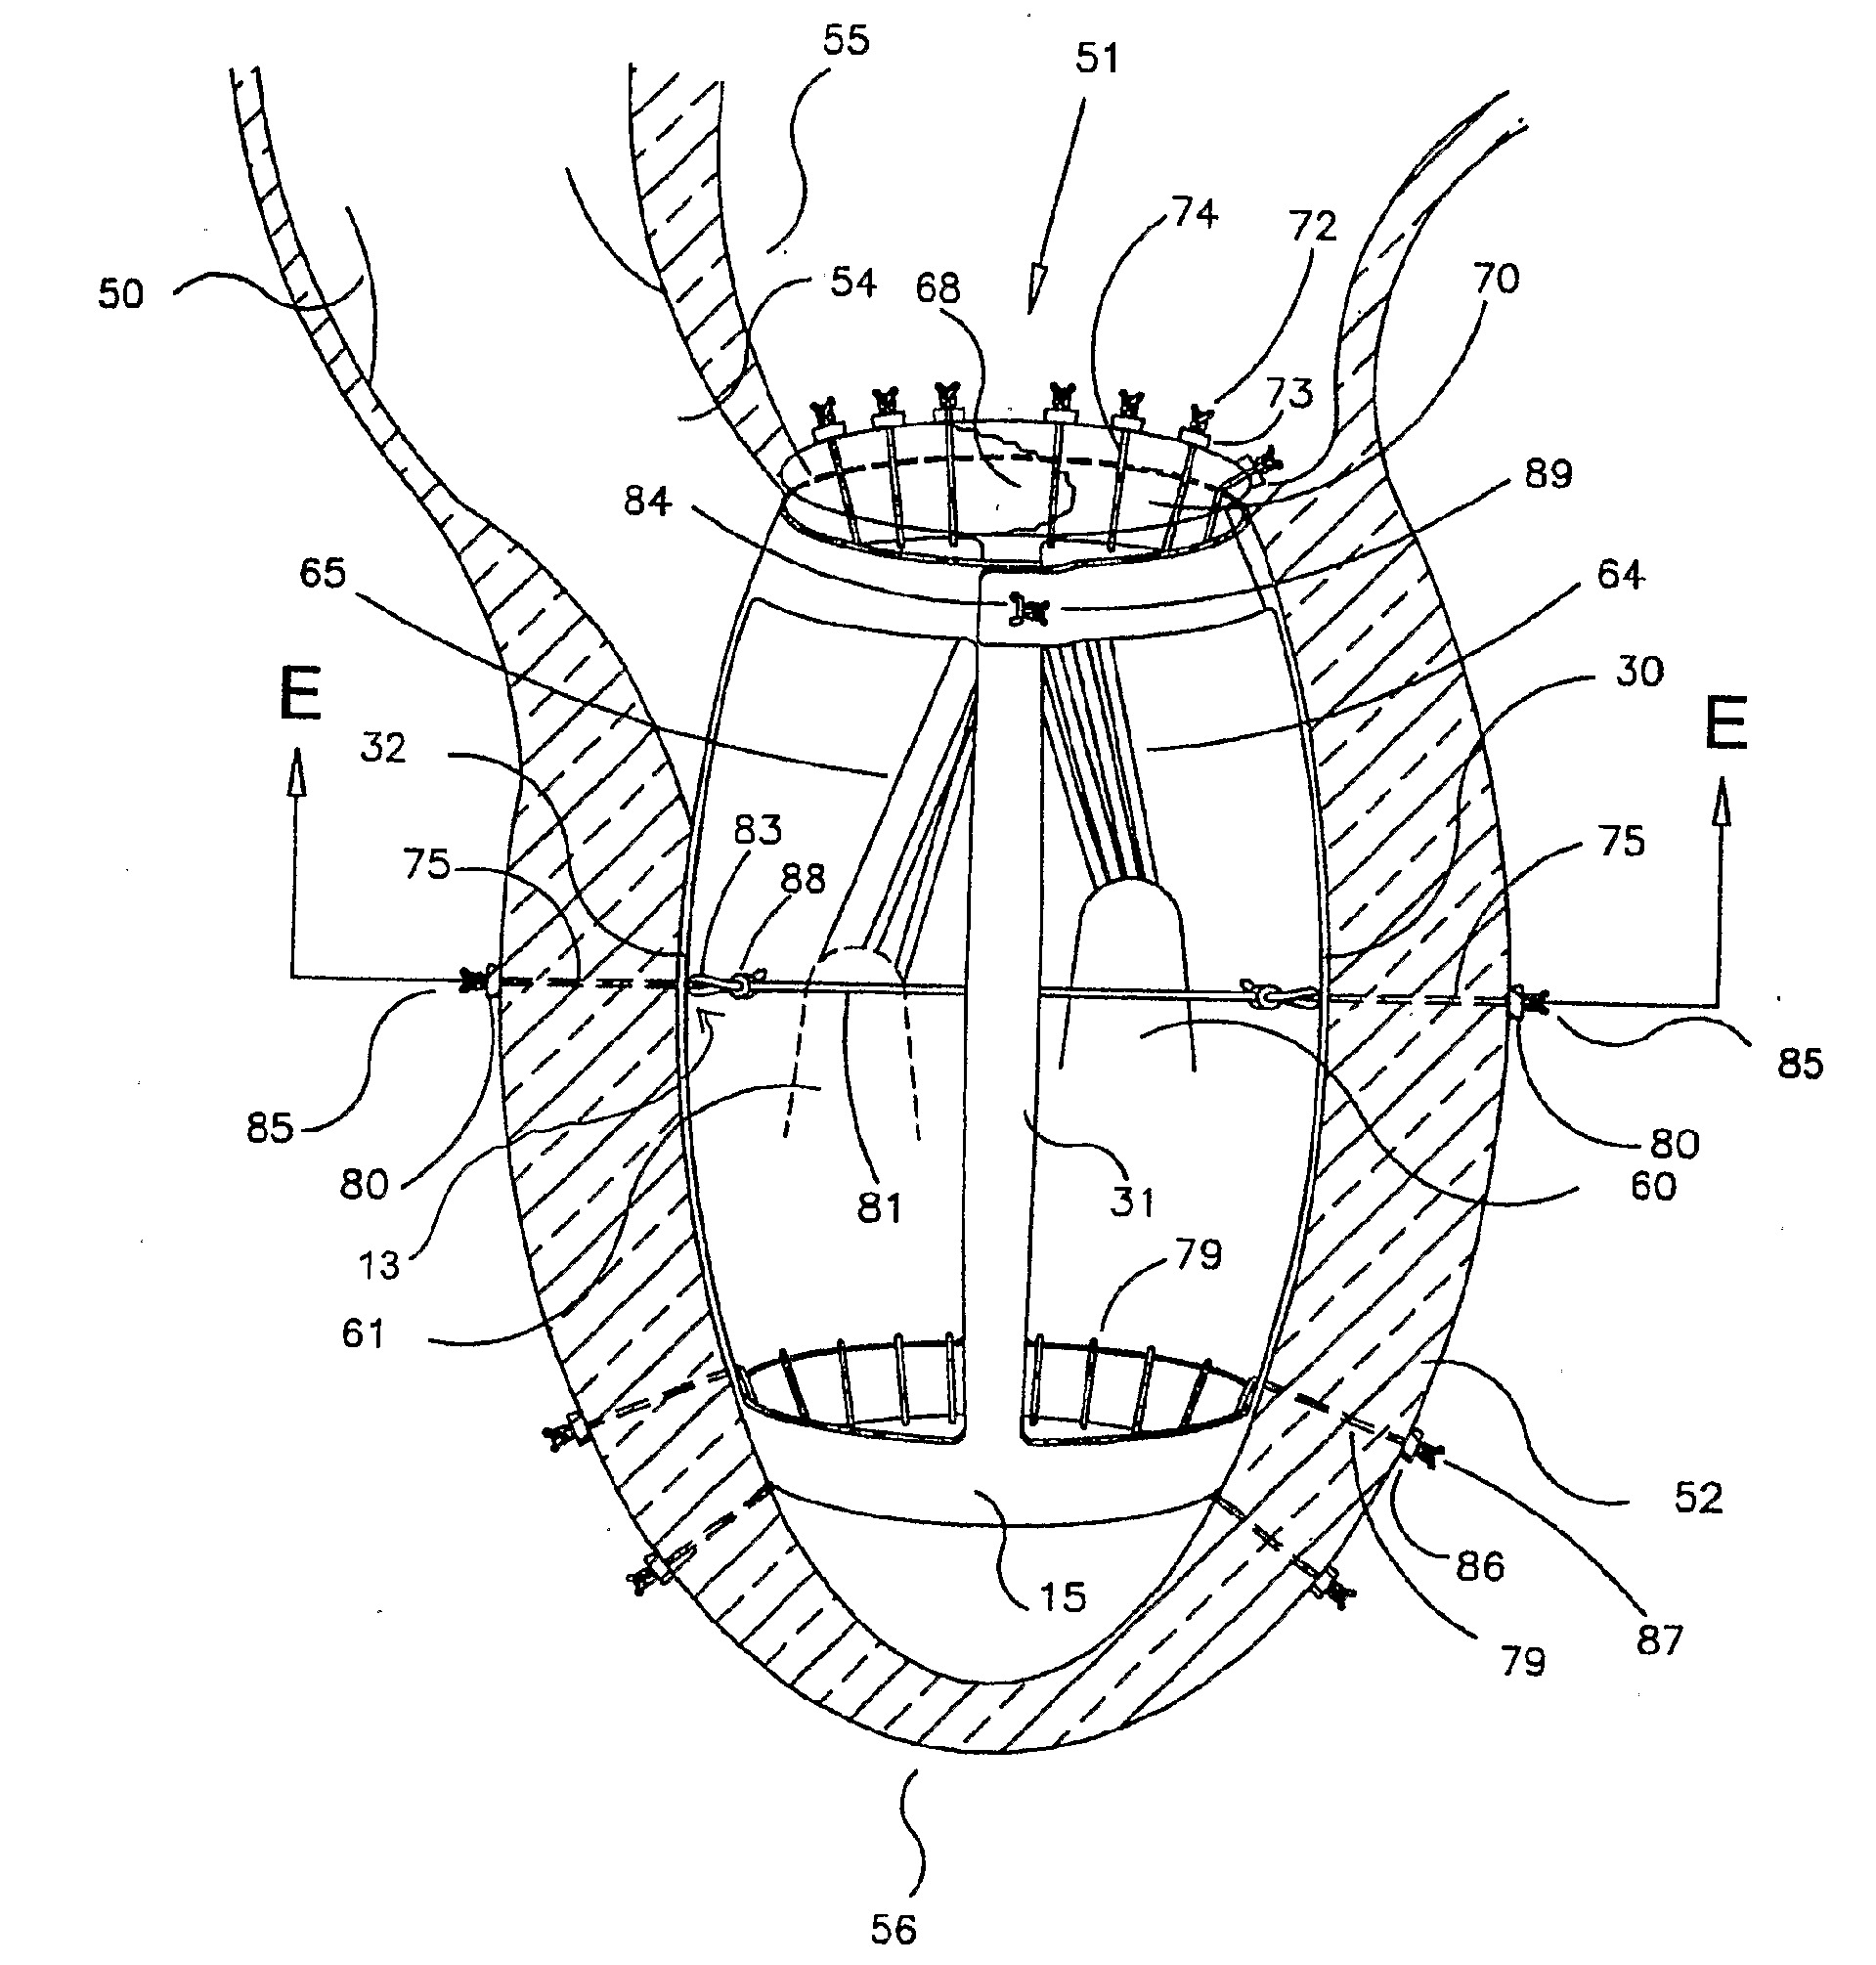 Method and Apparaus for the Surgical Treatment of Congestive Heart Failure